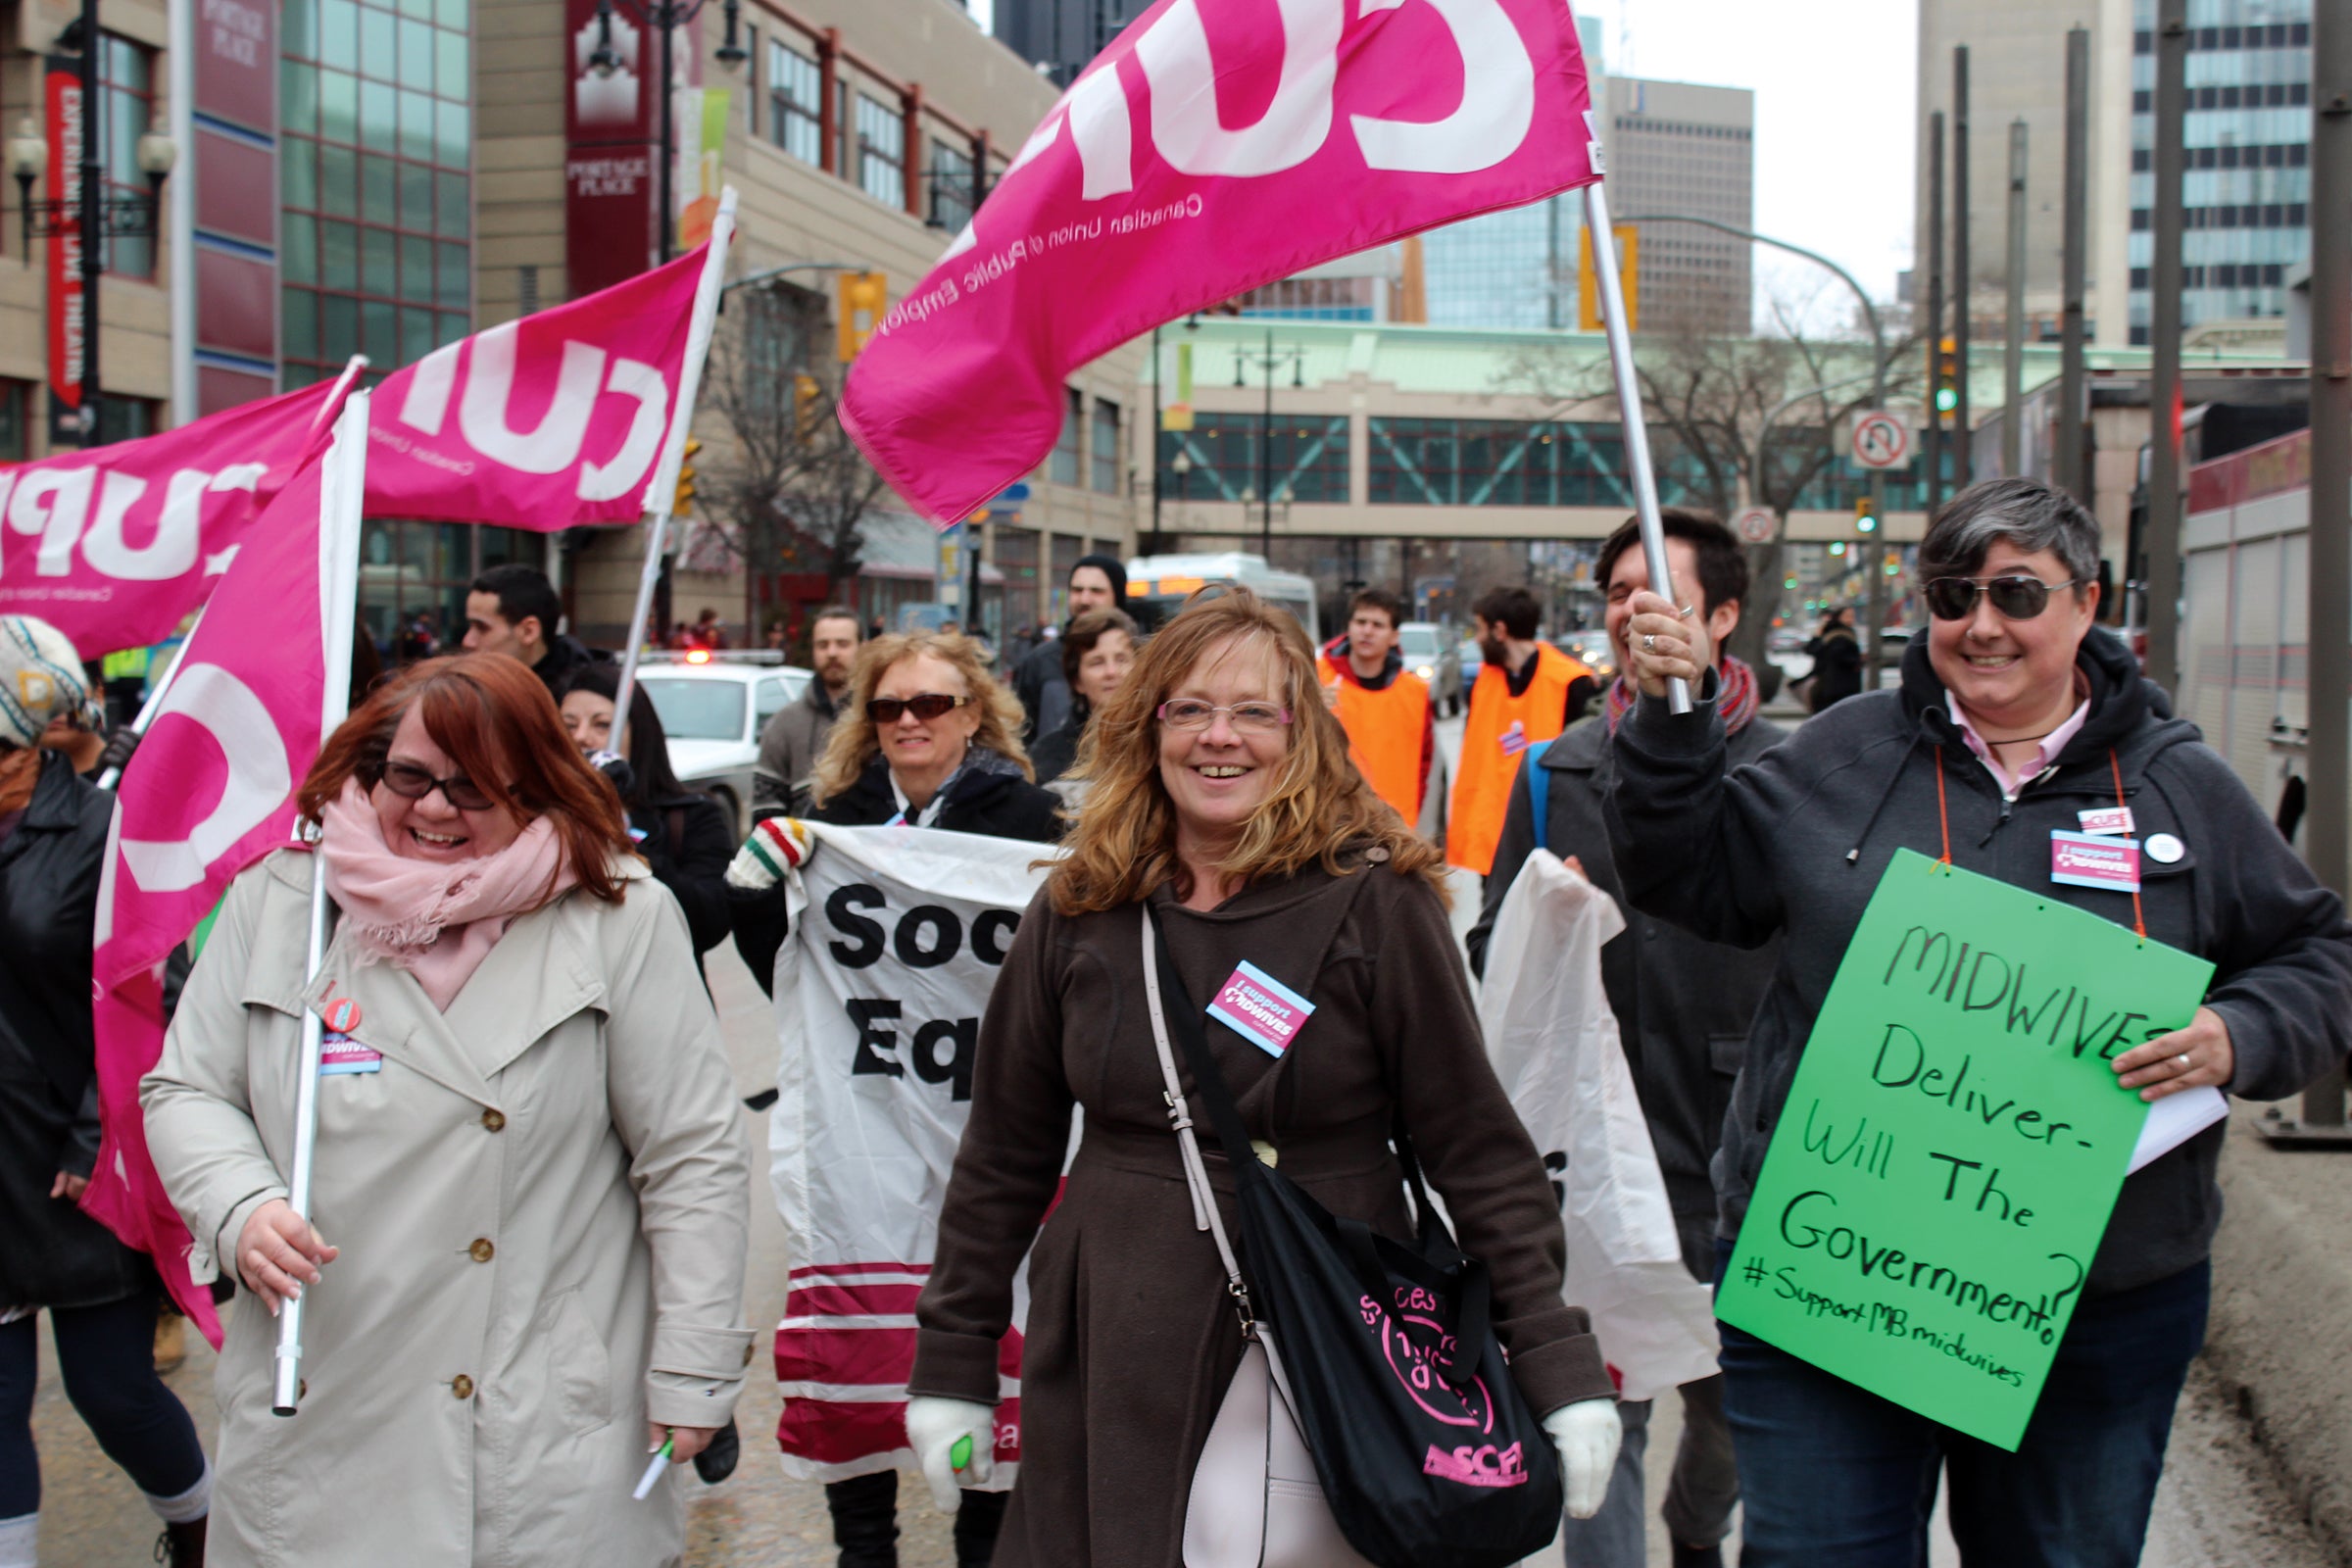 Women march holding CUPE flags and a protest sign that says &quot;Midwives deliver: will the government?&quot;